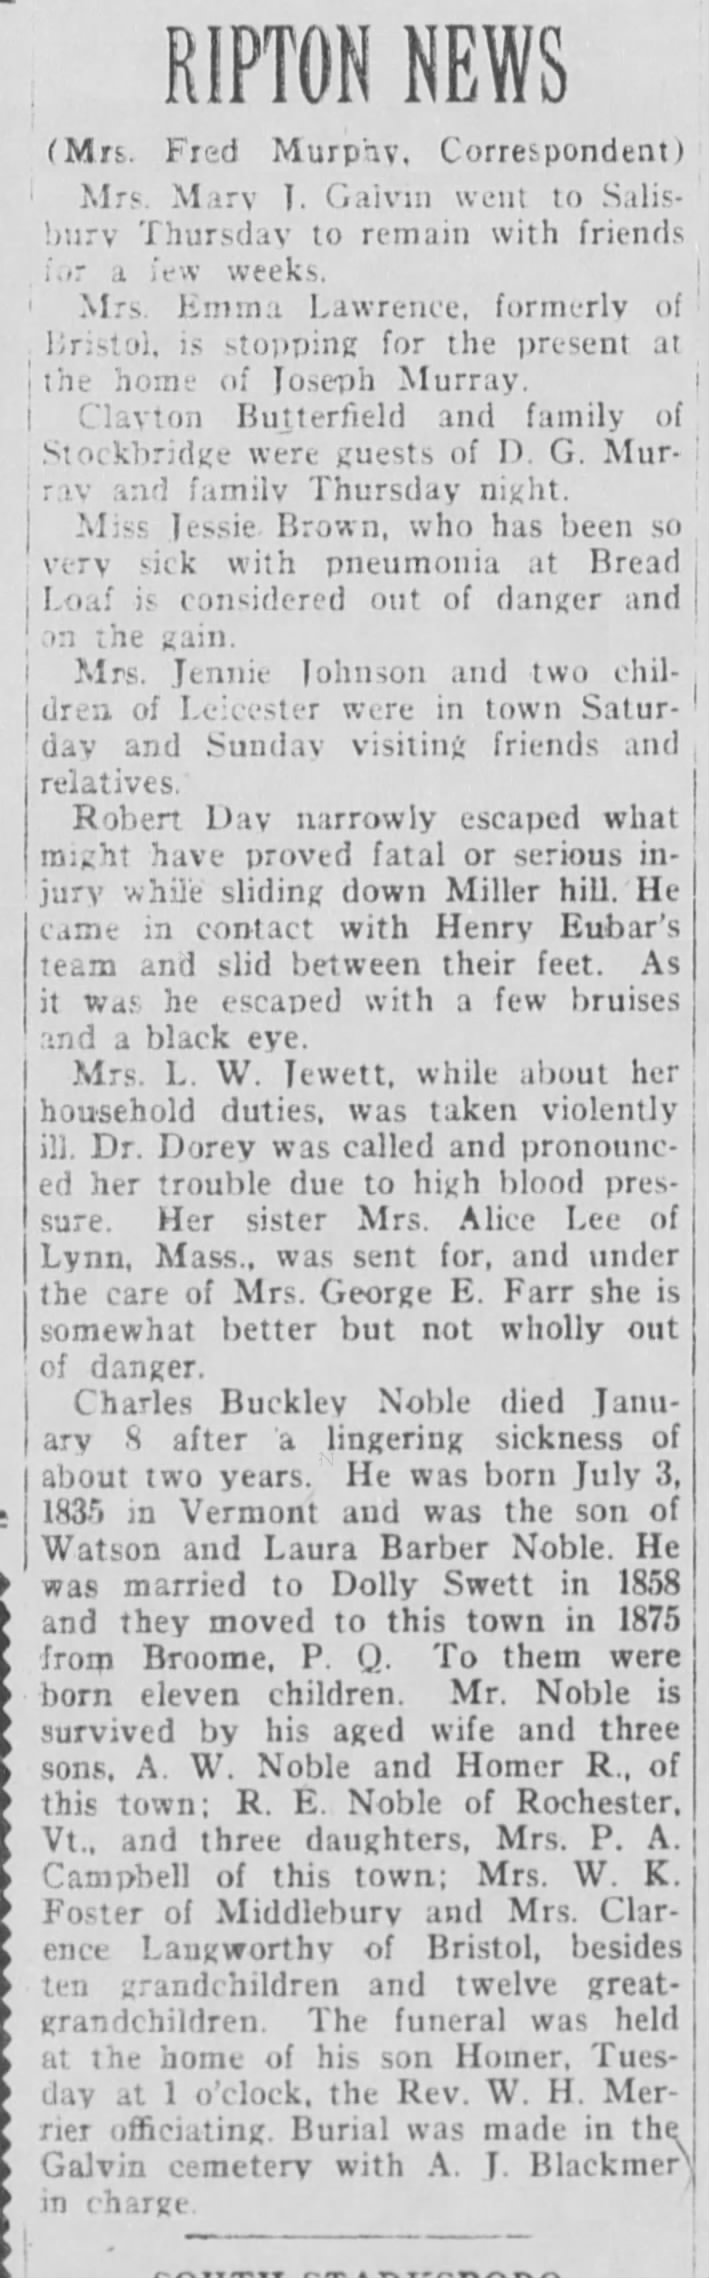 Middlebury Register 14 Jan 1921, p 5 col 3, death notice Charles Buckley Noble